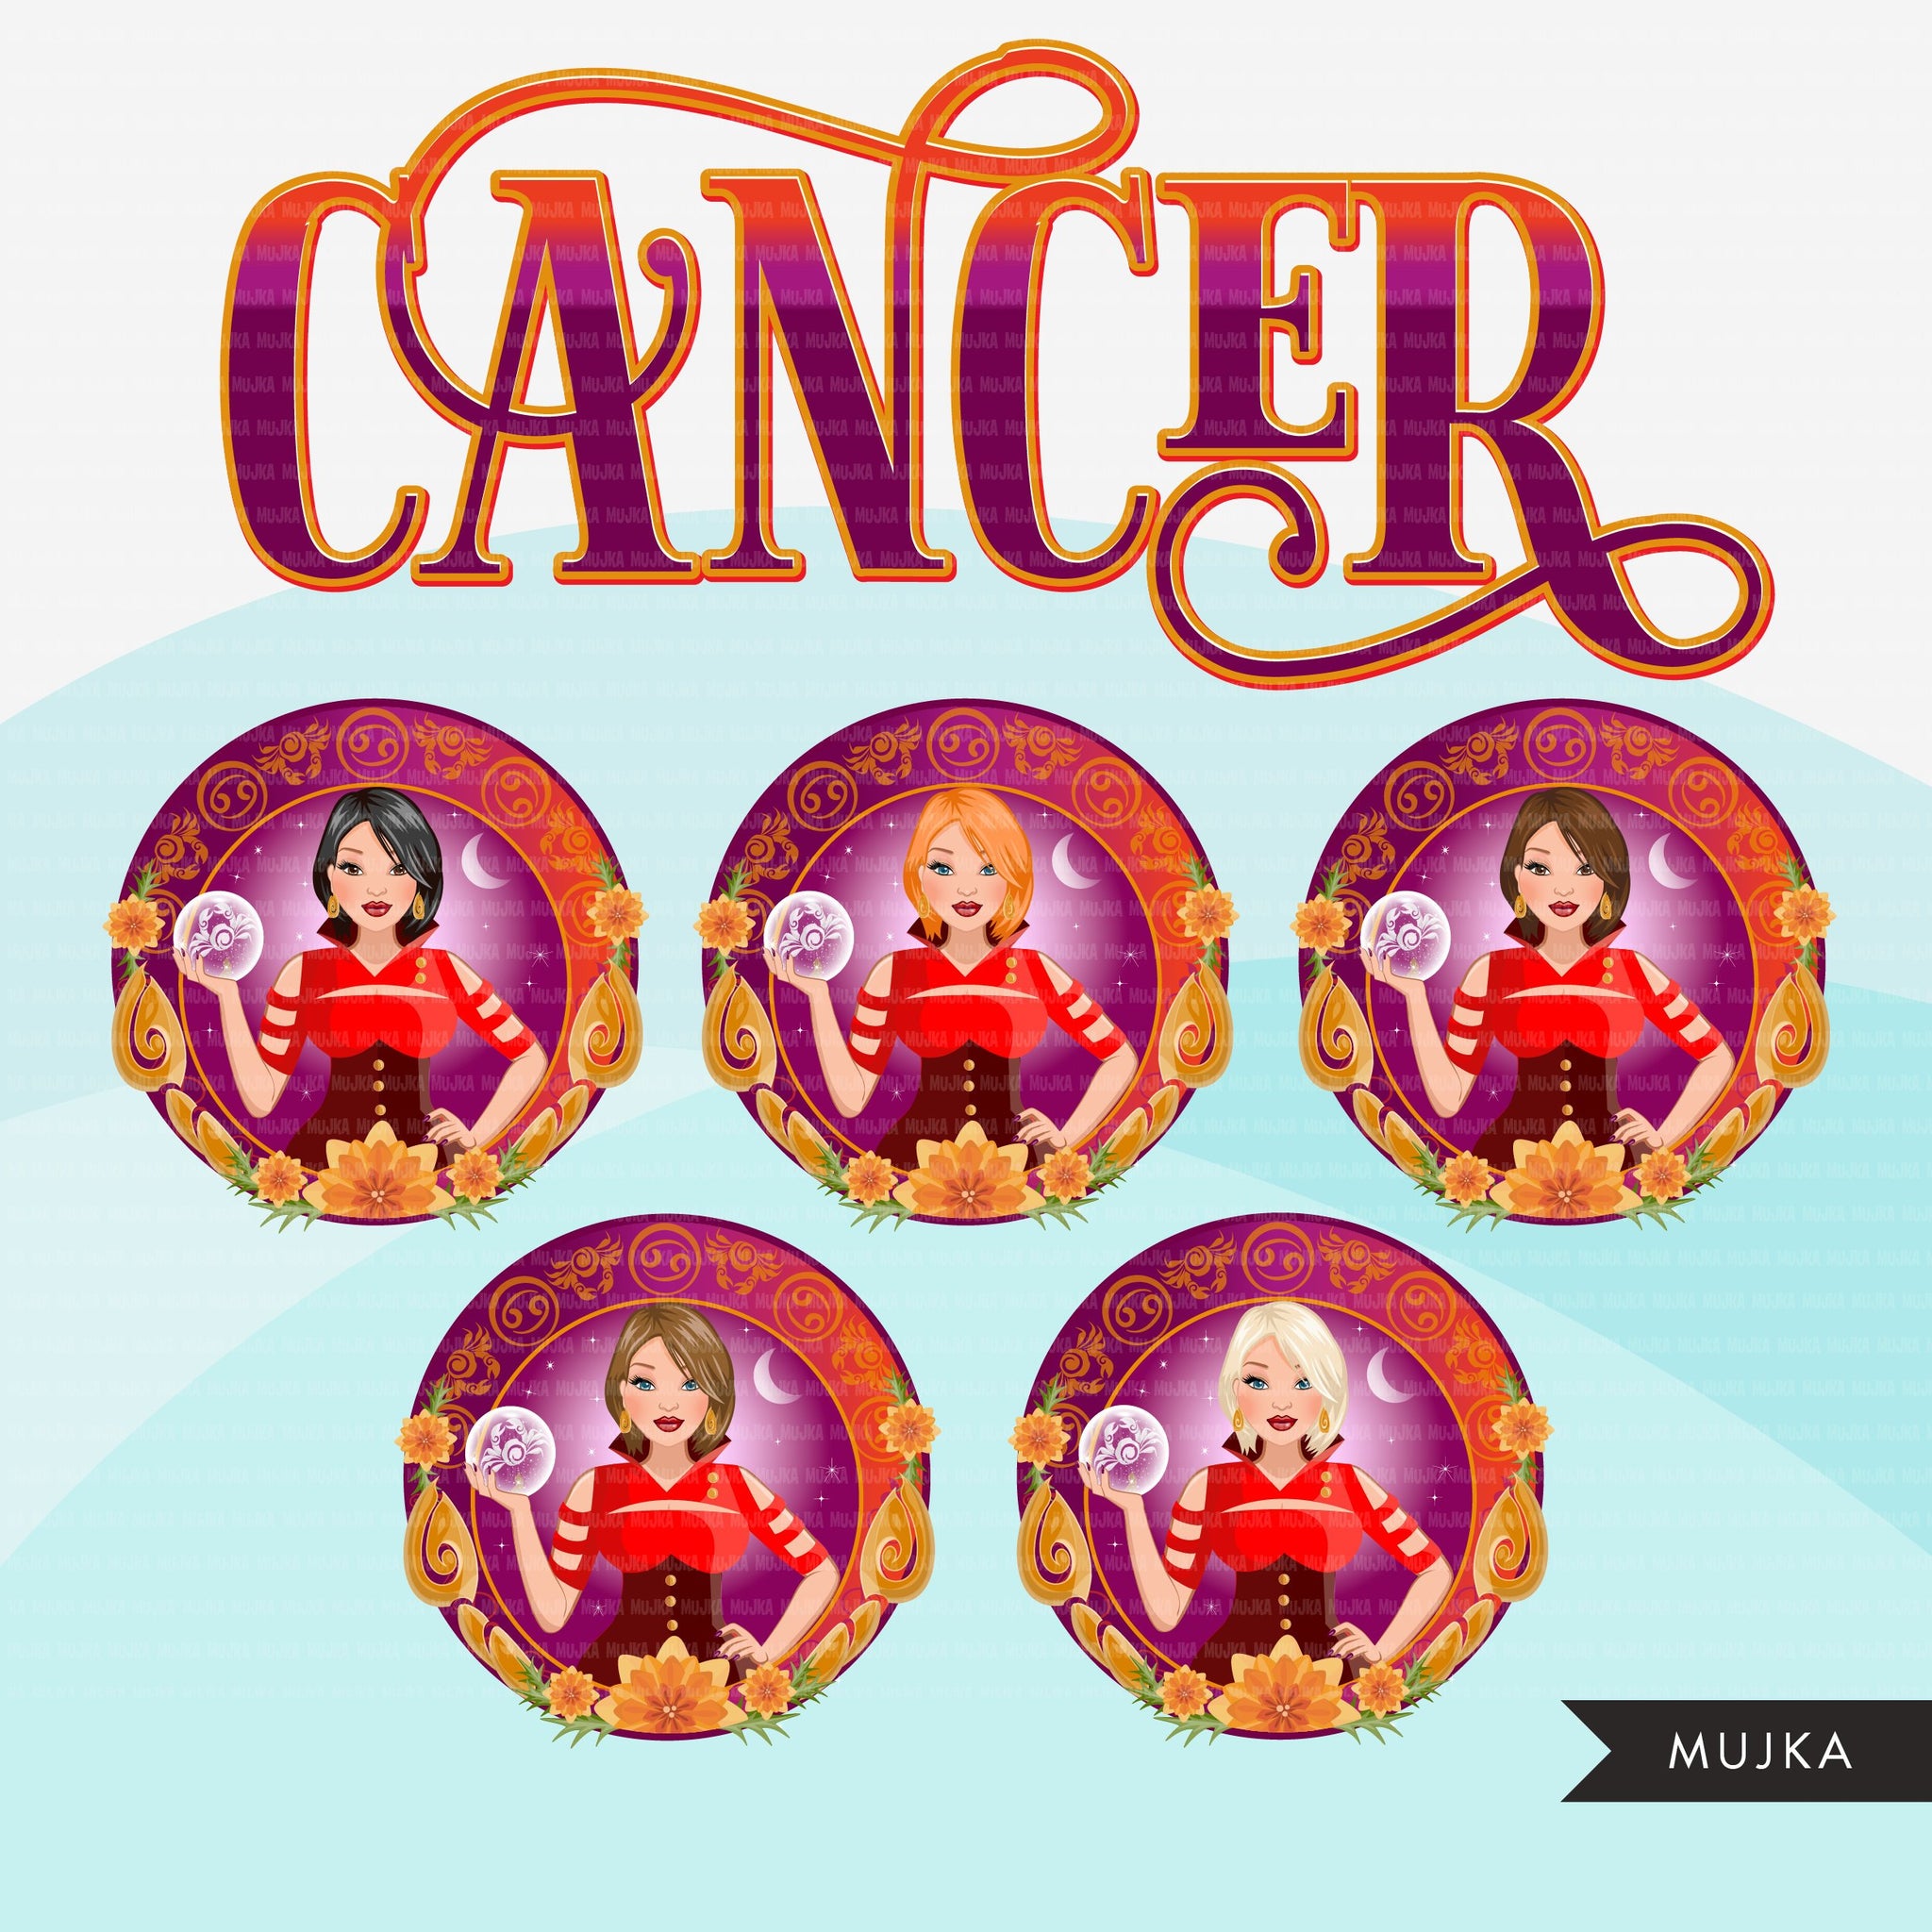 Zodiac Cancer Clipart, Png digital download, Sublimation Graphics for Cricut & Cameo, Caucasian Sort Hair Woman Horoscope sign designs